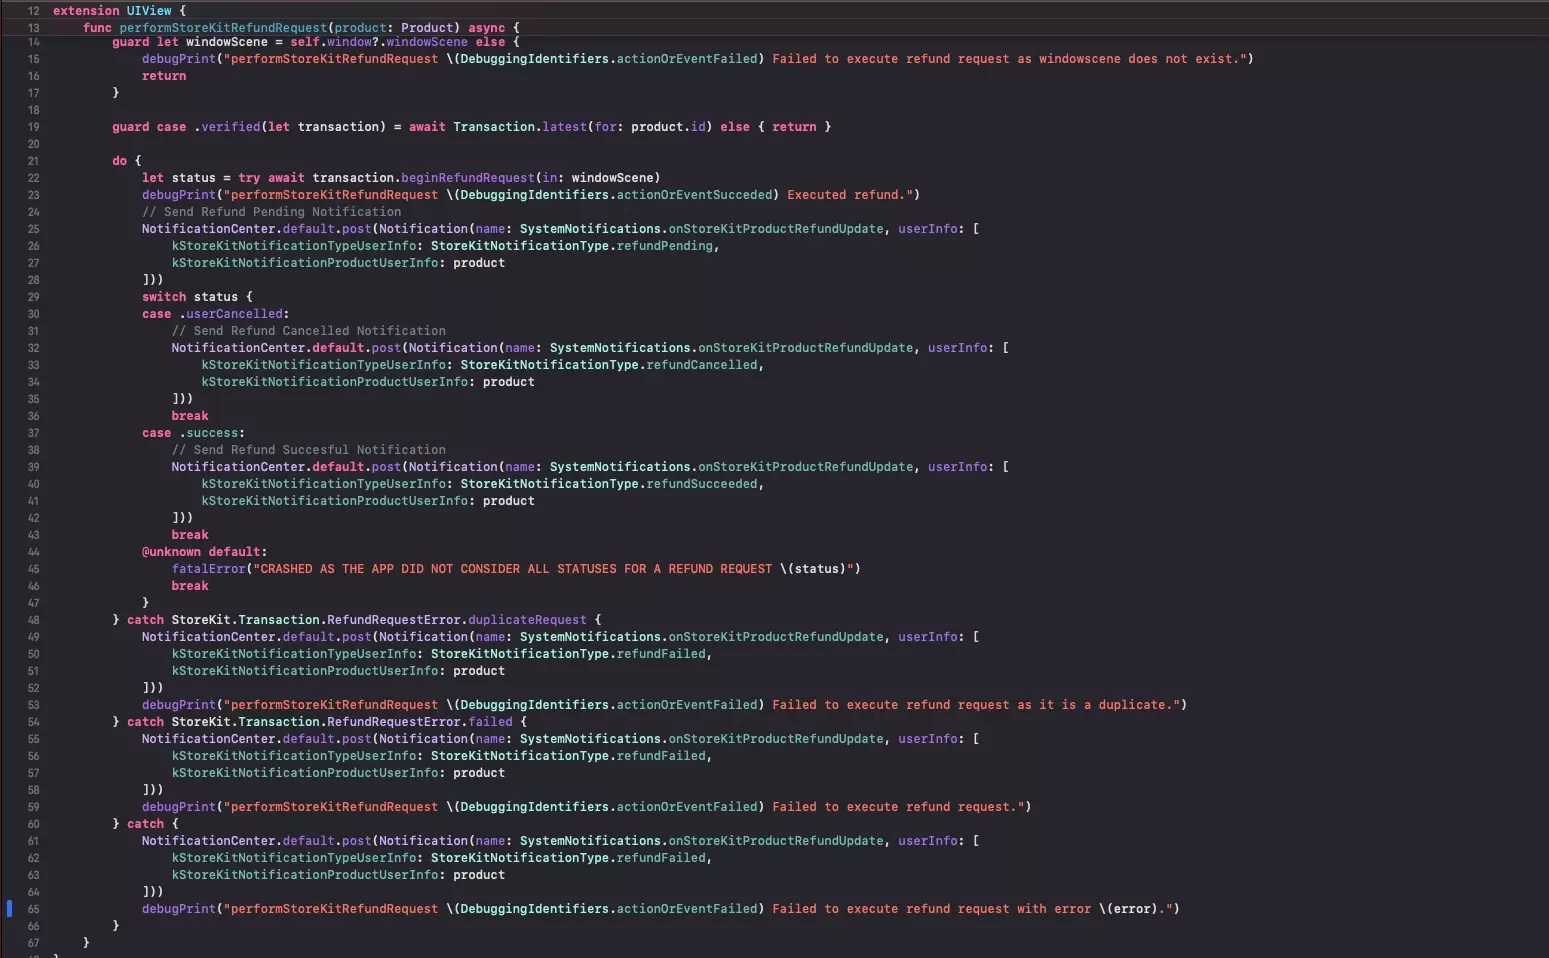 A screenshot of Xcode showing the code provided in the snippet below.